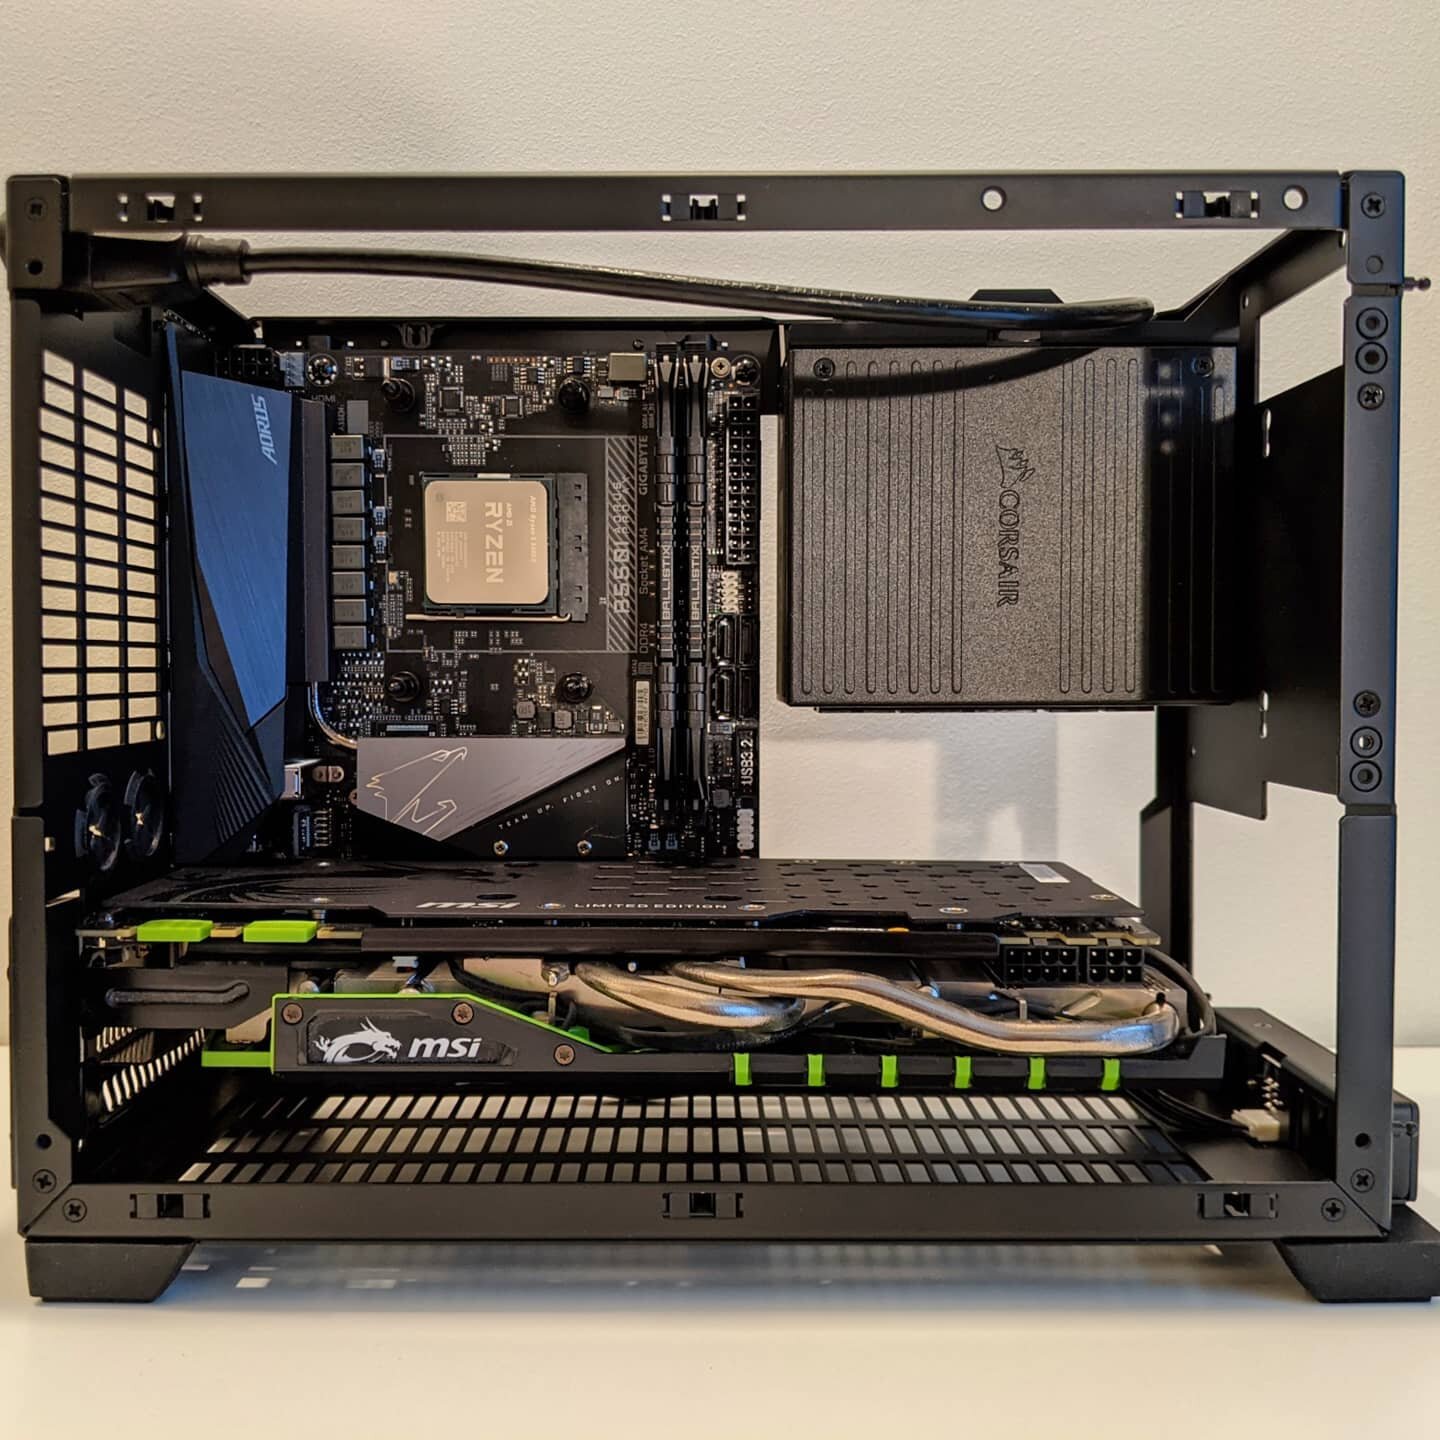 Cable management is always a challenge when building a Small Form Factor (SFF) PC. The expectation of having a neat and efficient interior often meets the reality spaghetti of tangling cables.

Most of the cables come with the power supply. Despite t